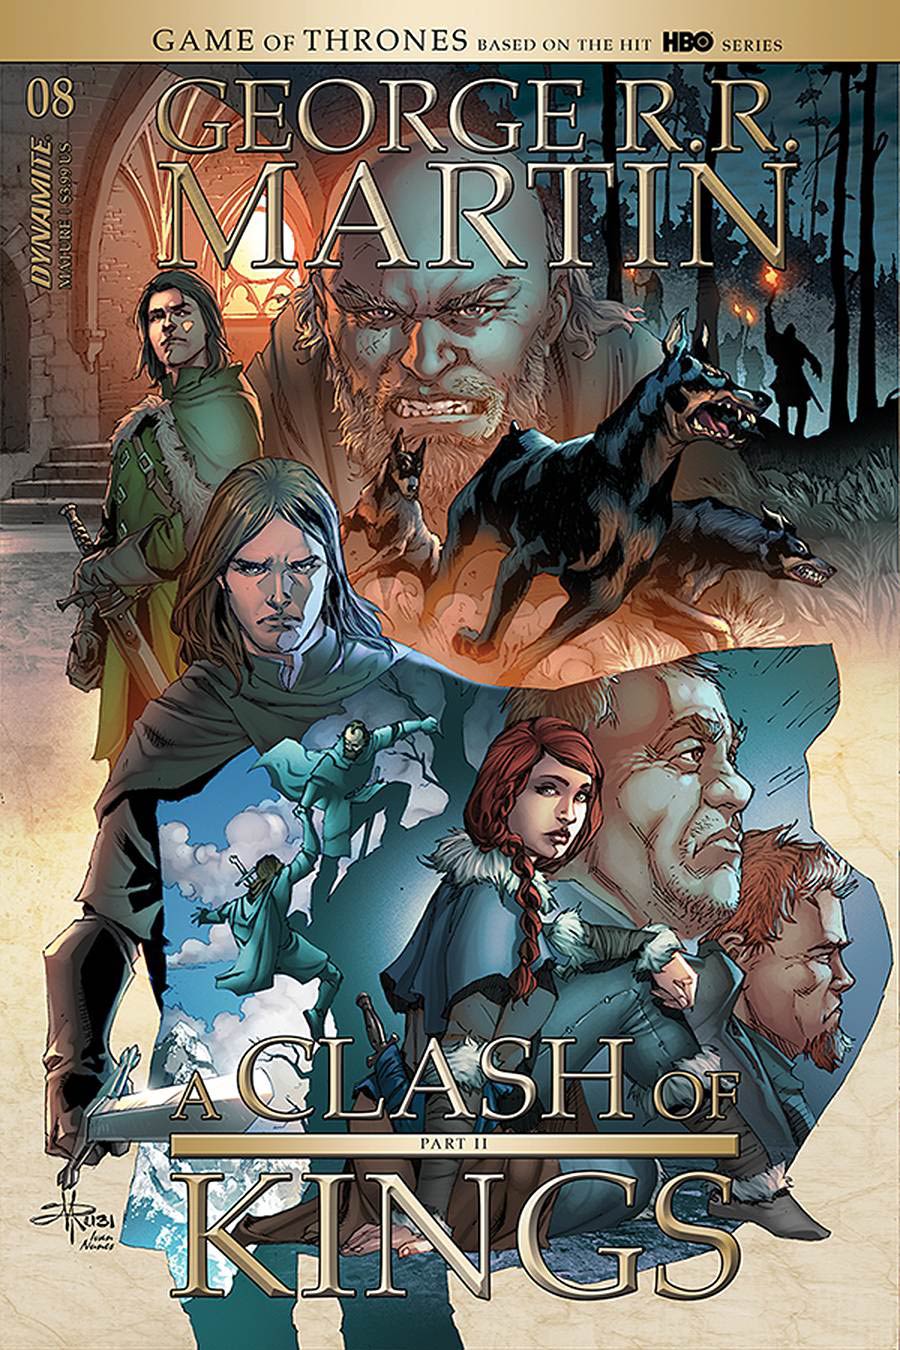 George RR Martin's A Clash of Kings: The Comic Book Vol. 2 #10 See more